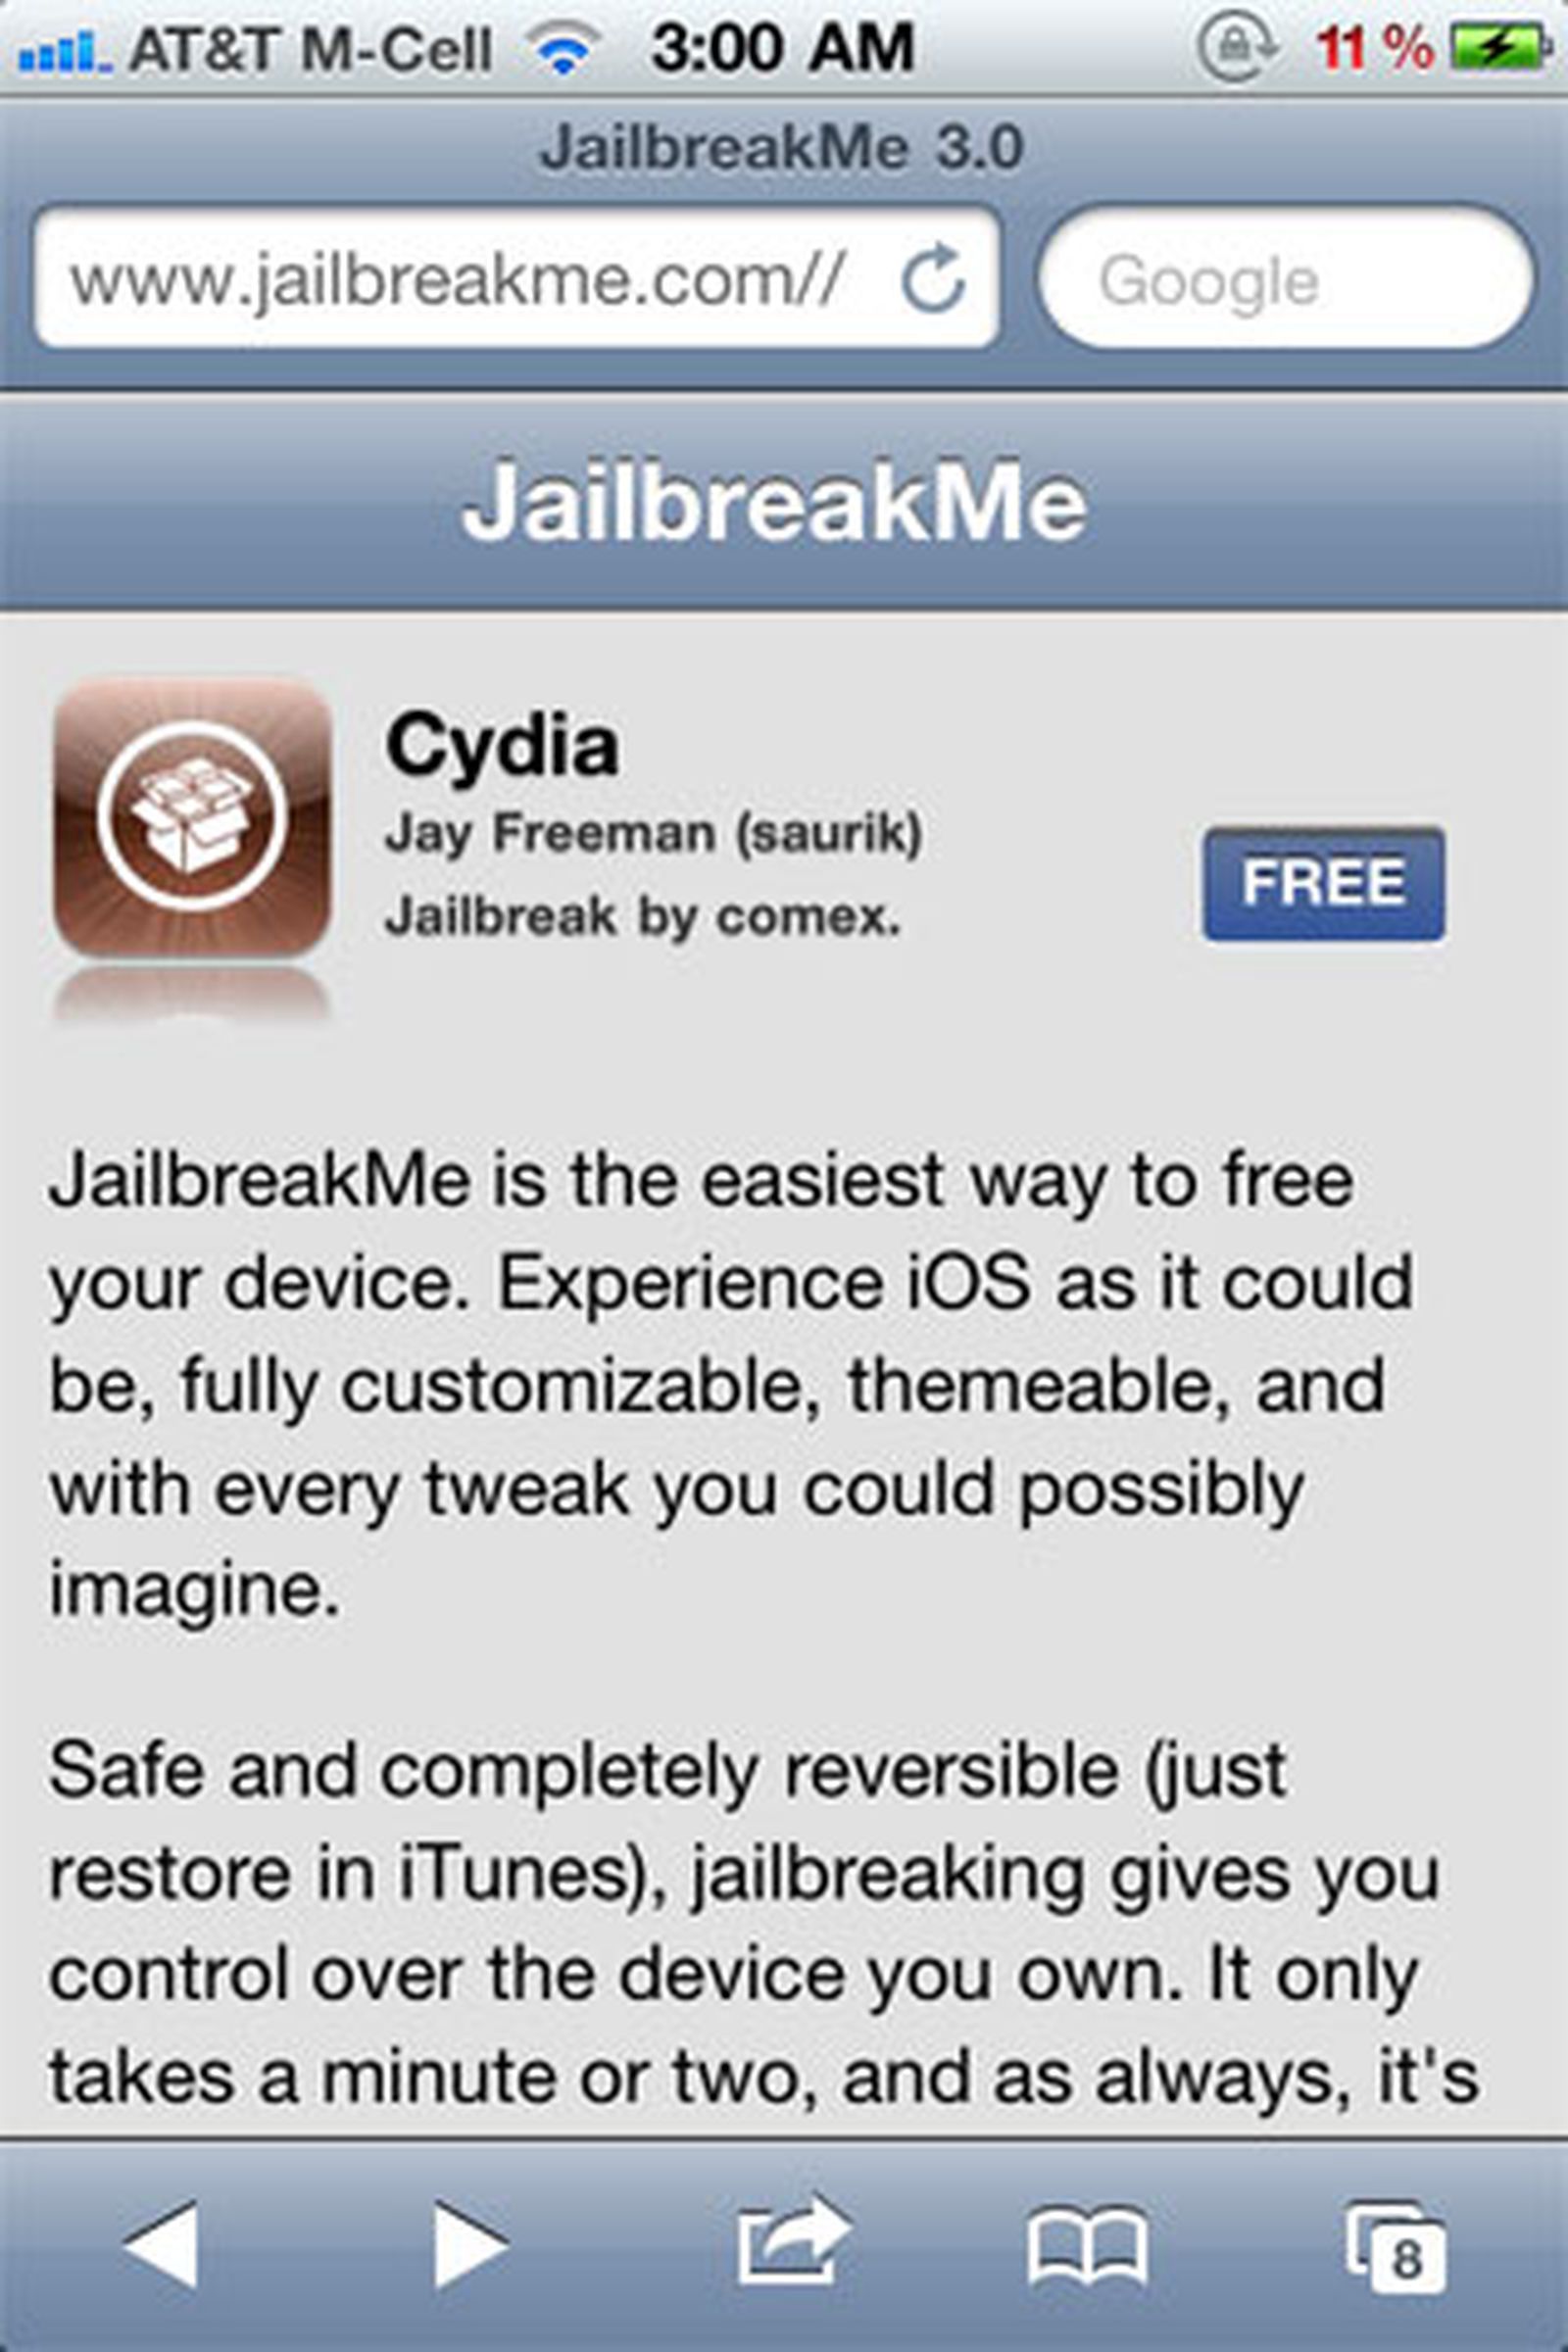 How To Jailbreak Your iPad Or iPad 2 The Right Way [How-To]